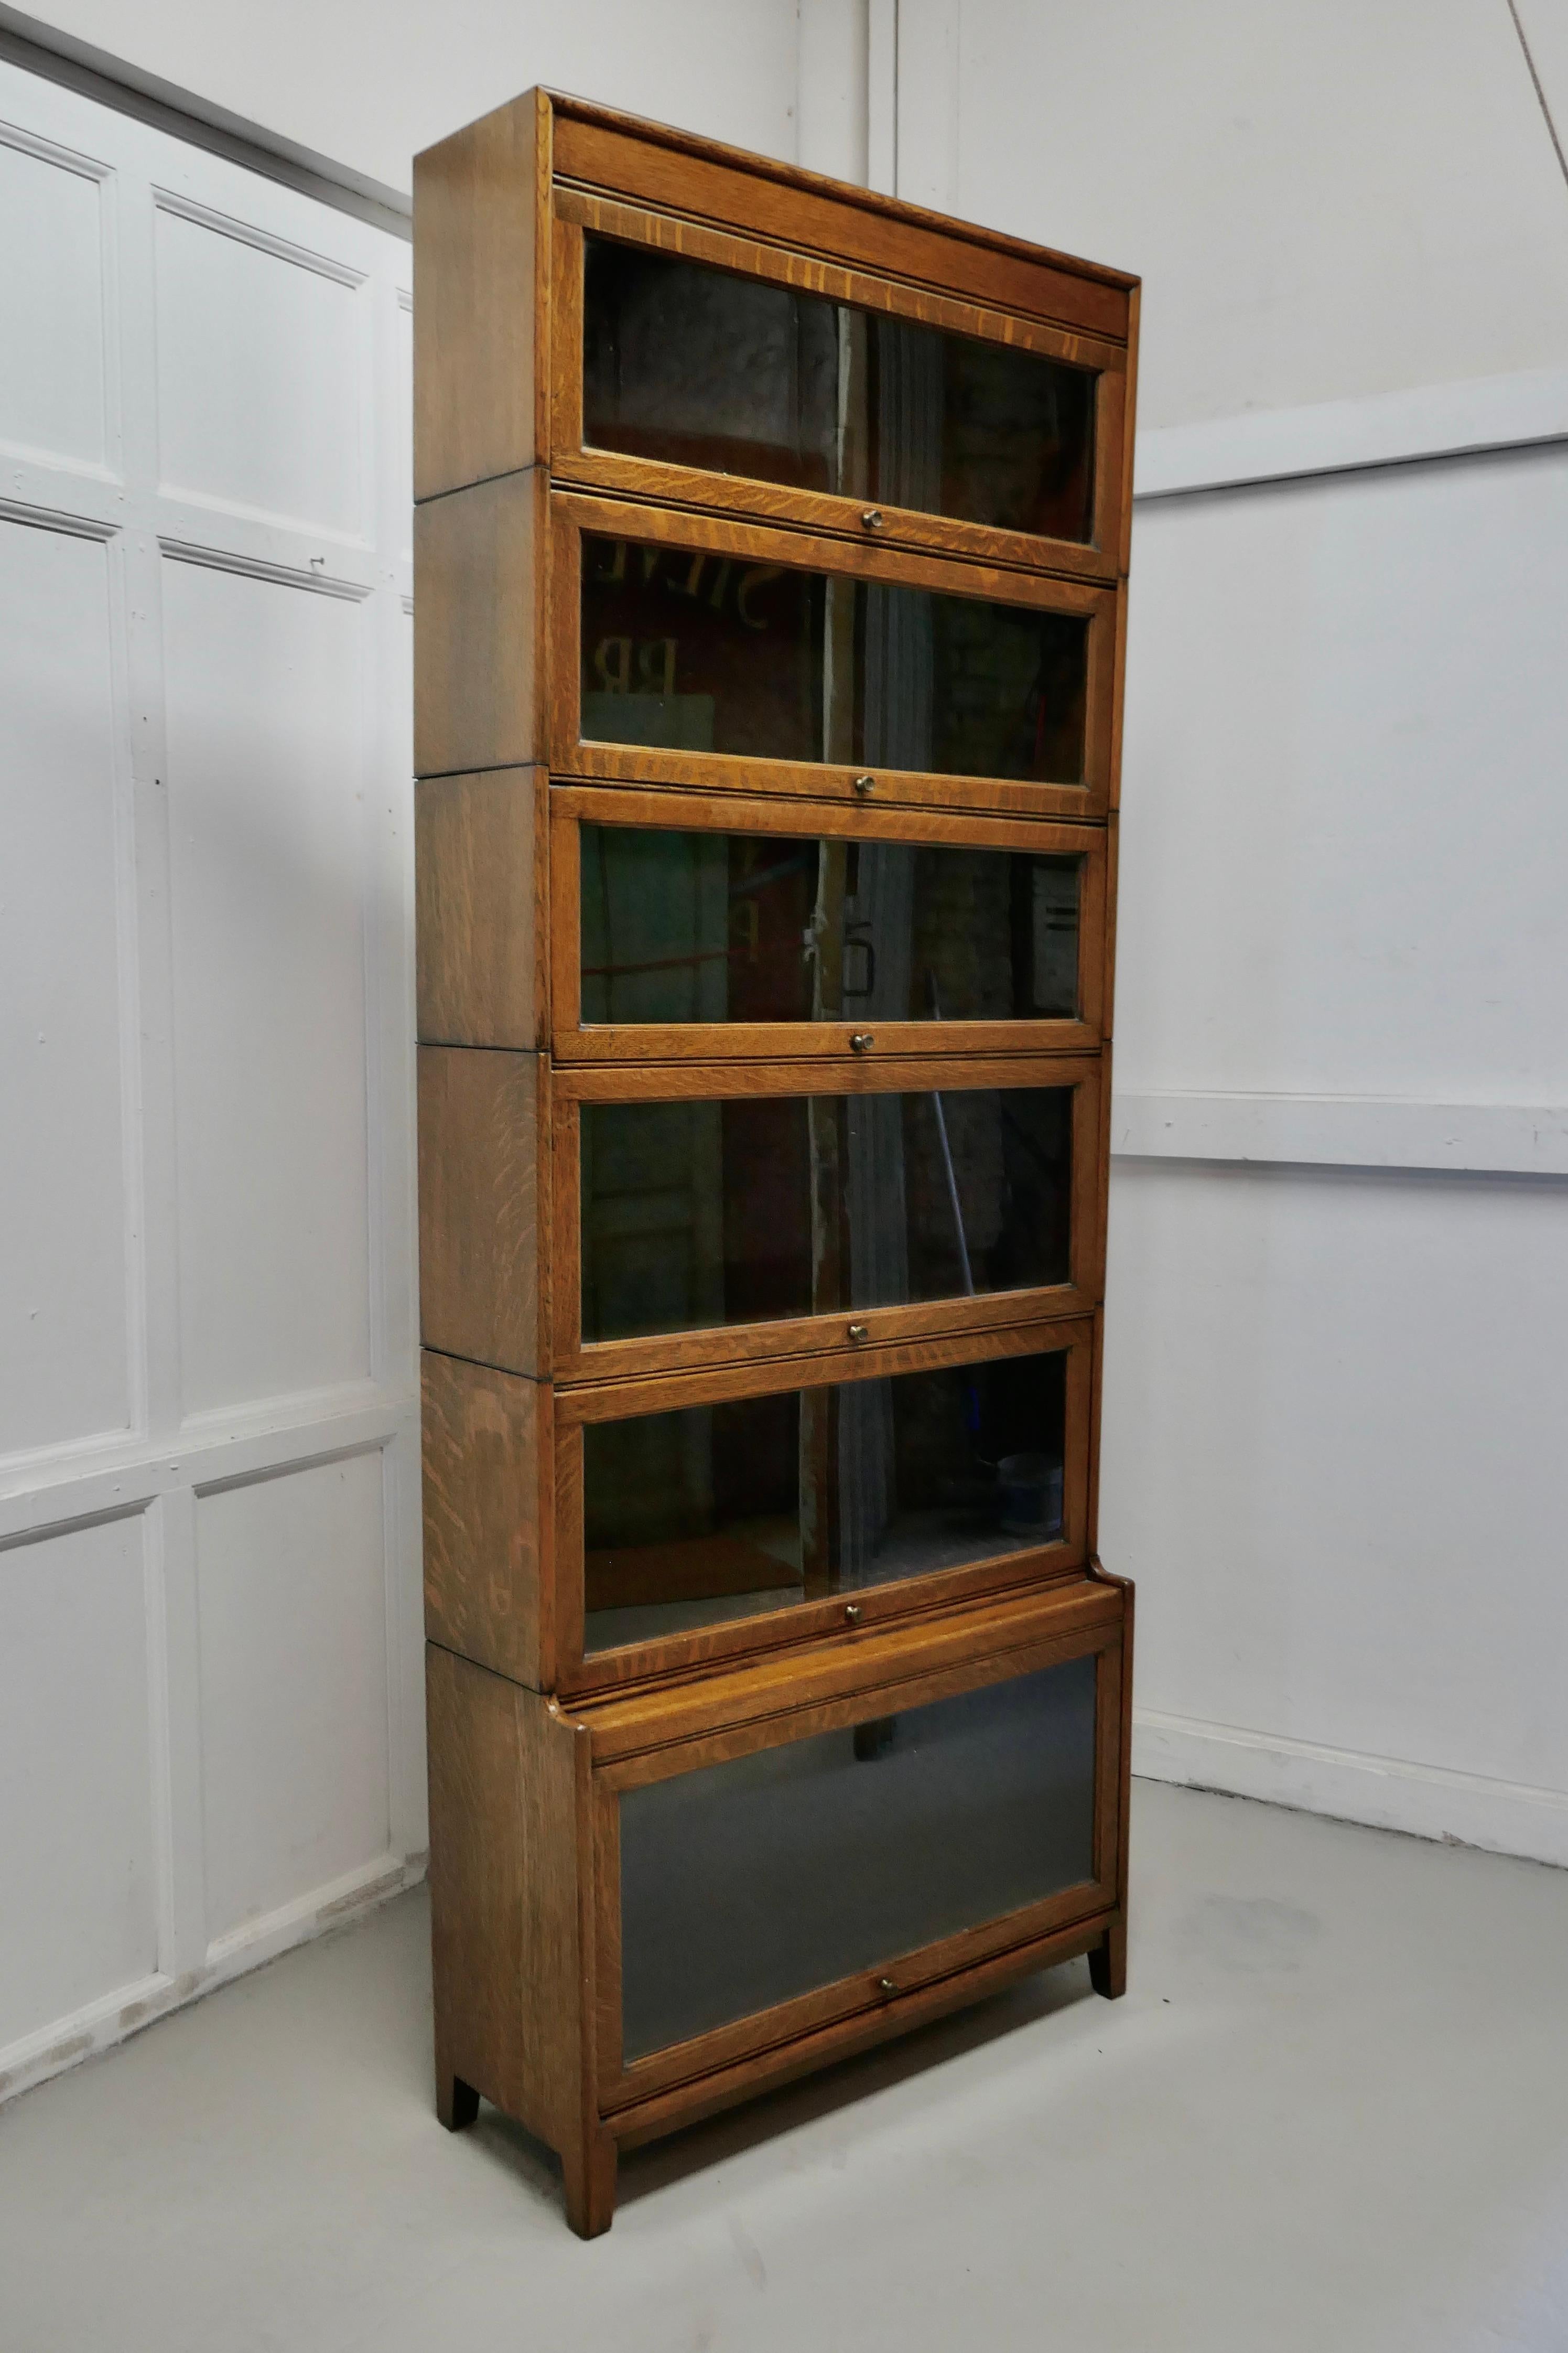 A tall Art Deco golden oak barrister waterfall bookcase, made by Gumm

The bookcase is very tall made up from 6 section all of which are stamped with the makers name “Gumm”

All the sections of the bookcase have glazed up and over doors which